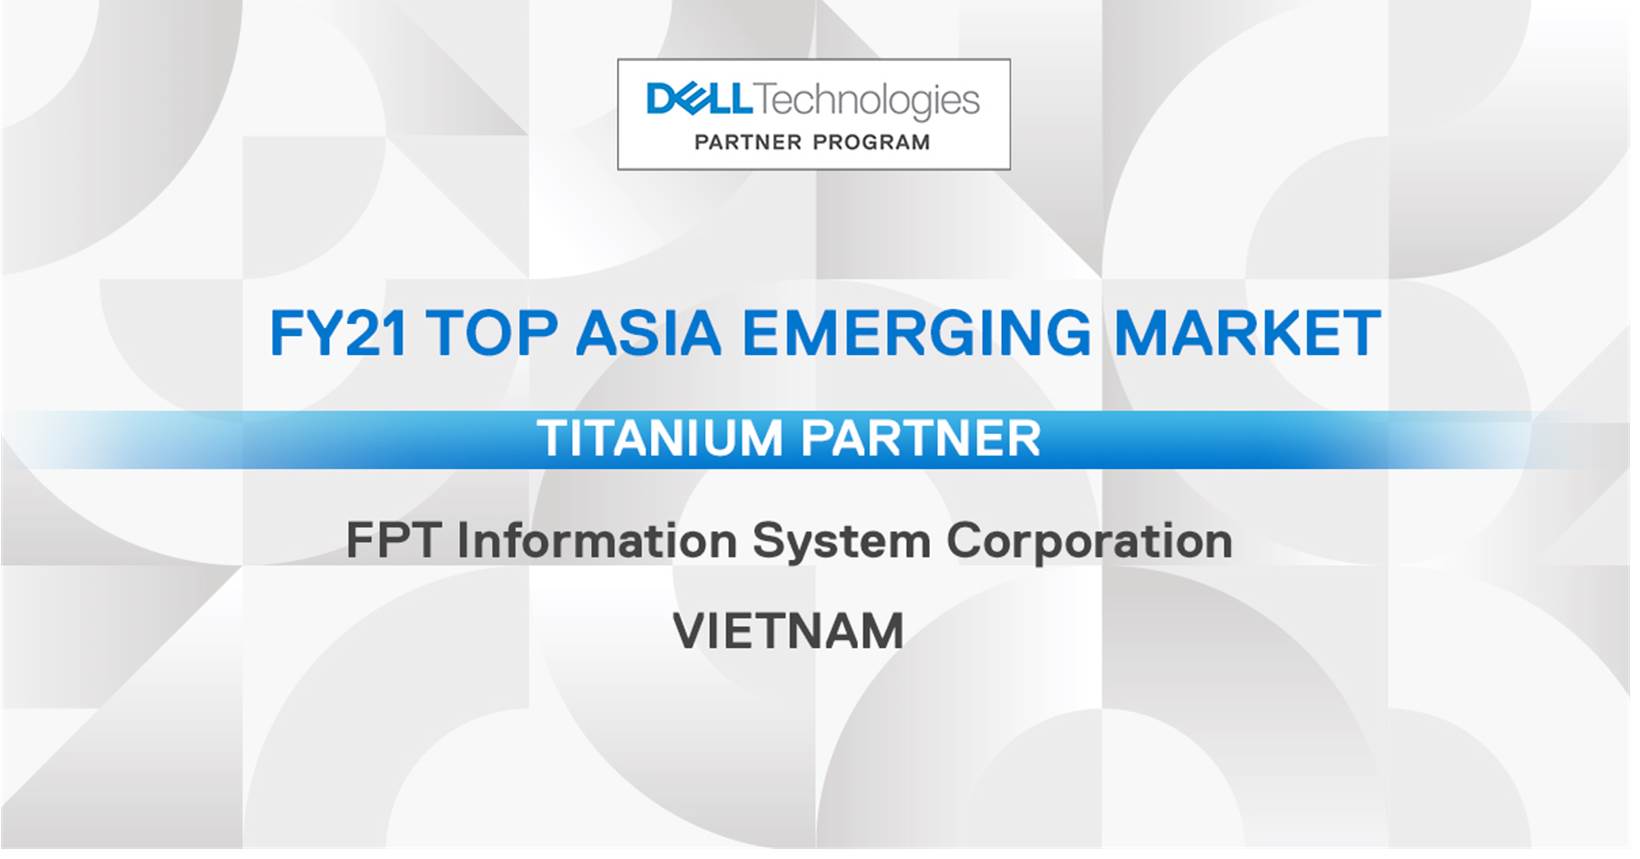 Dell Technologies FY21 Top Asia Emerging Market